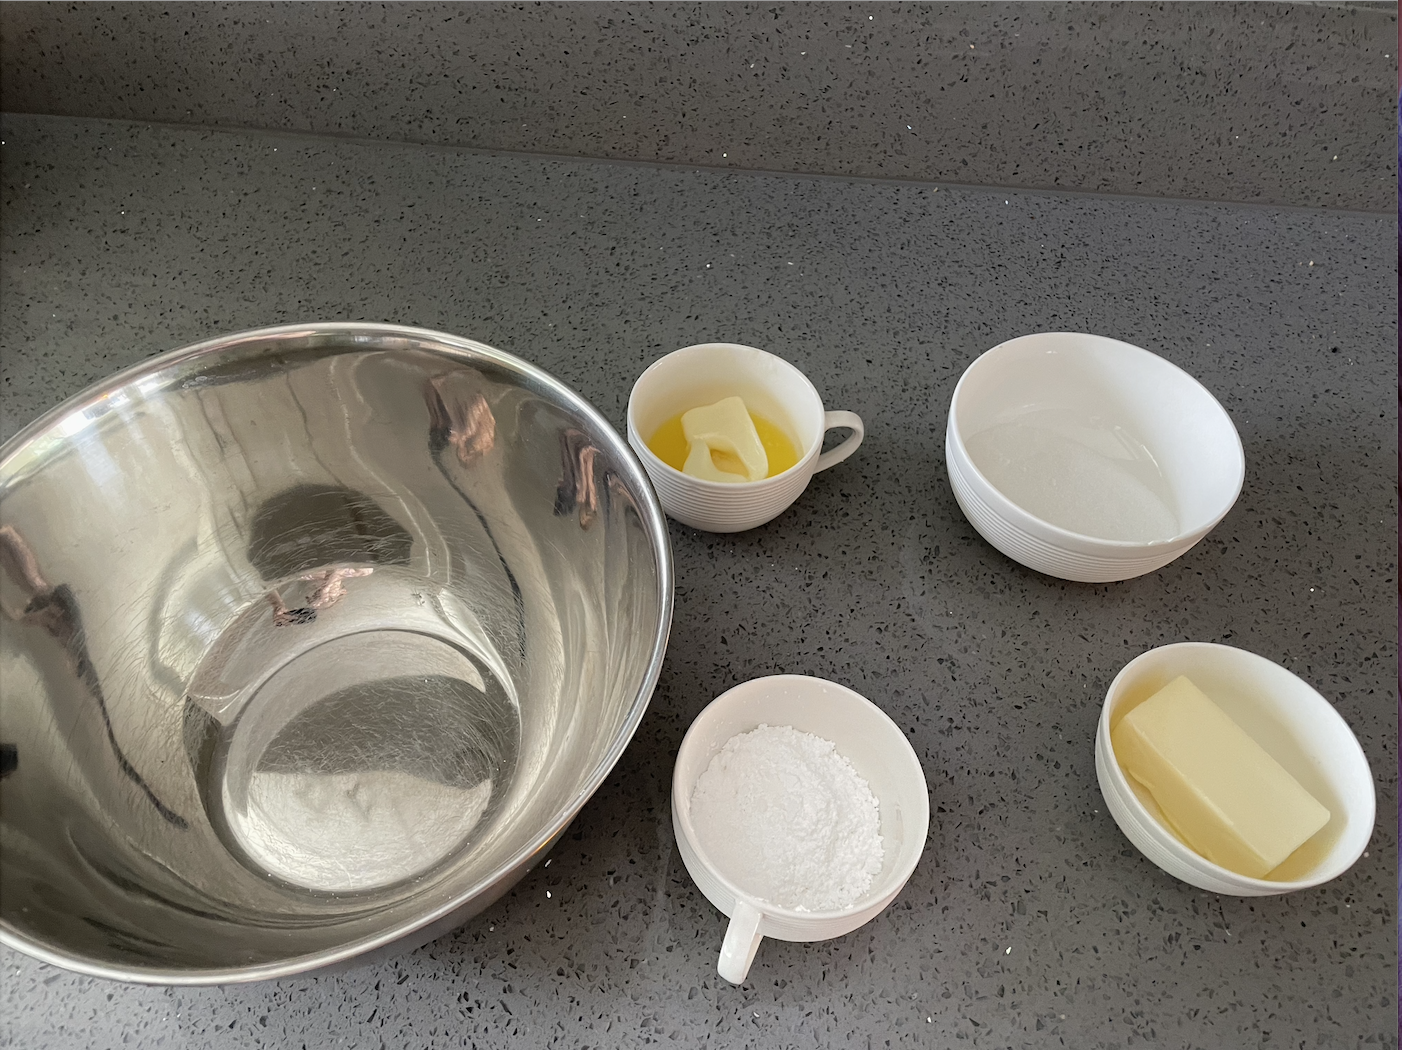 An empty bowl, two small bowls of butter, and two bowls of sugar